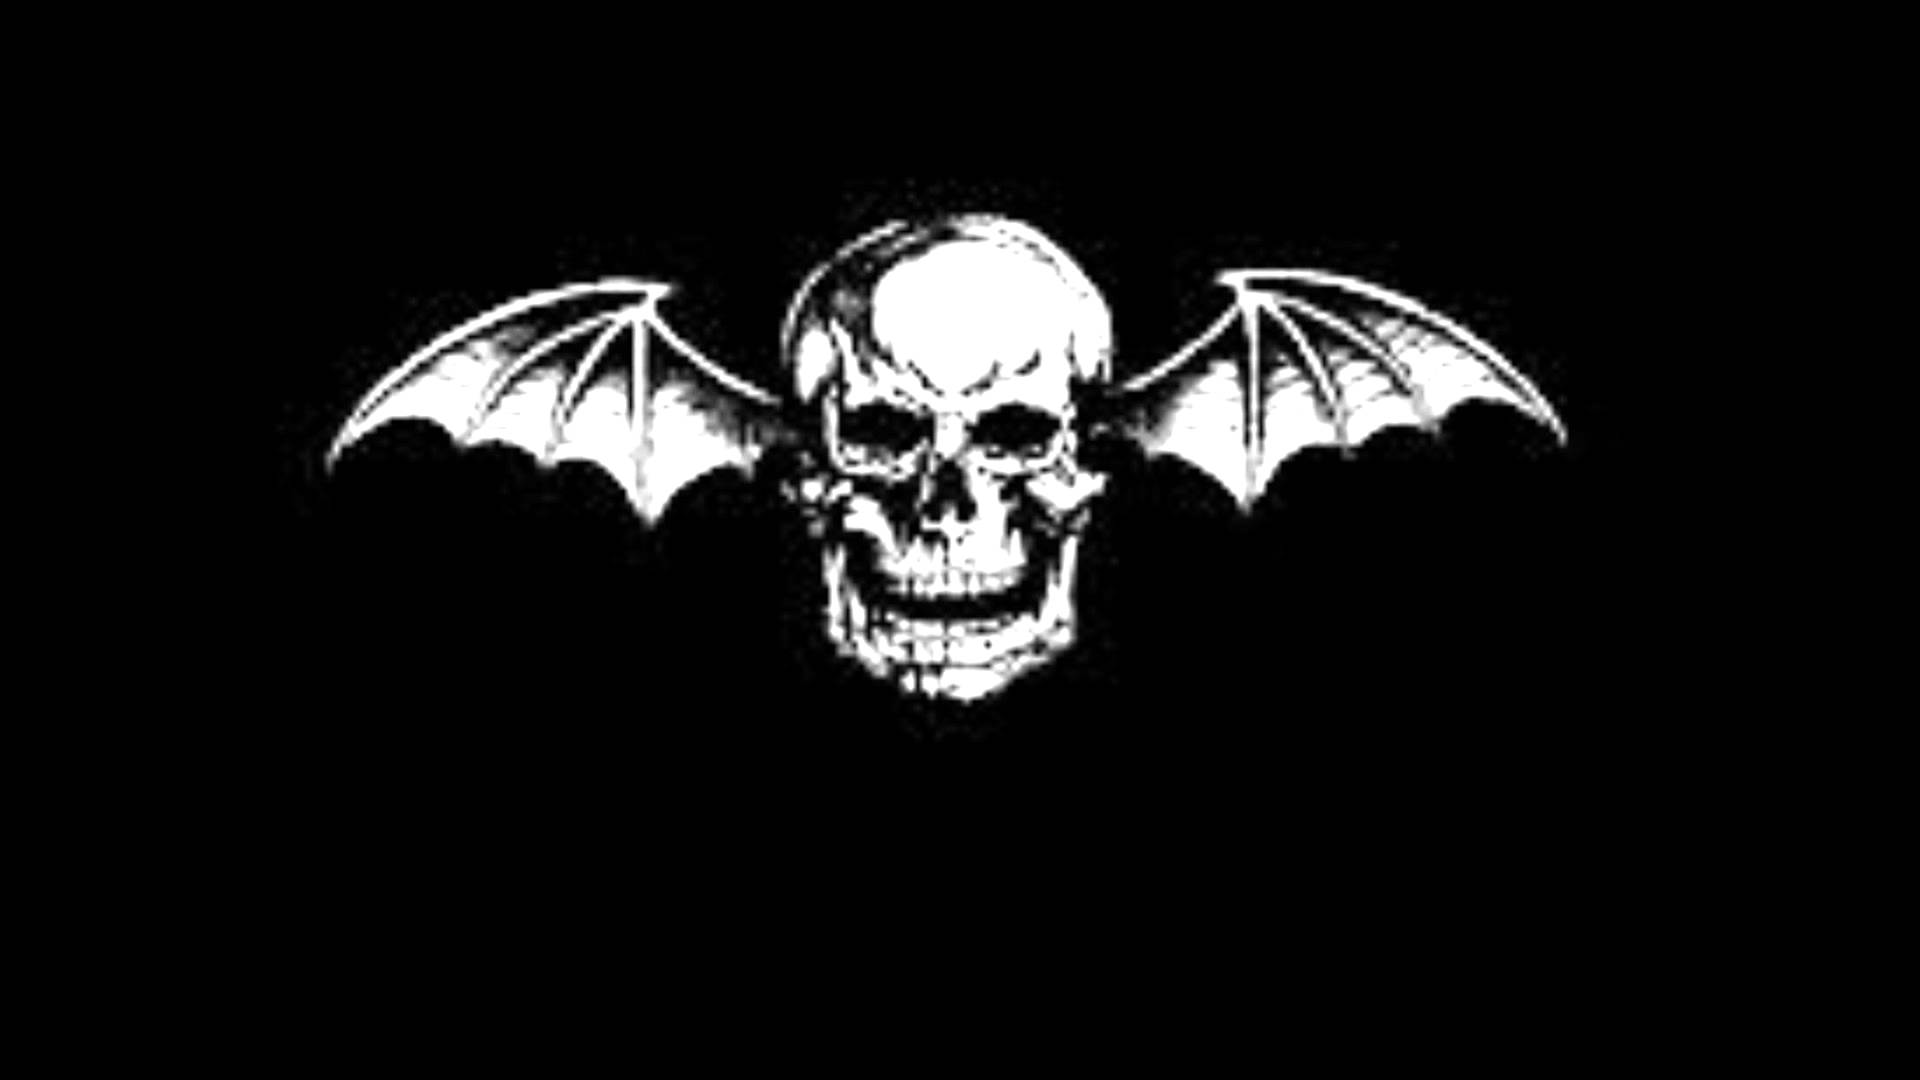 Avenged Sevenfold Deathbat Wallpaper By Chaotichazard On Pictures